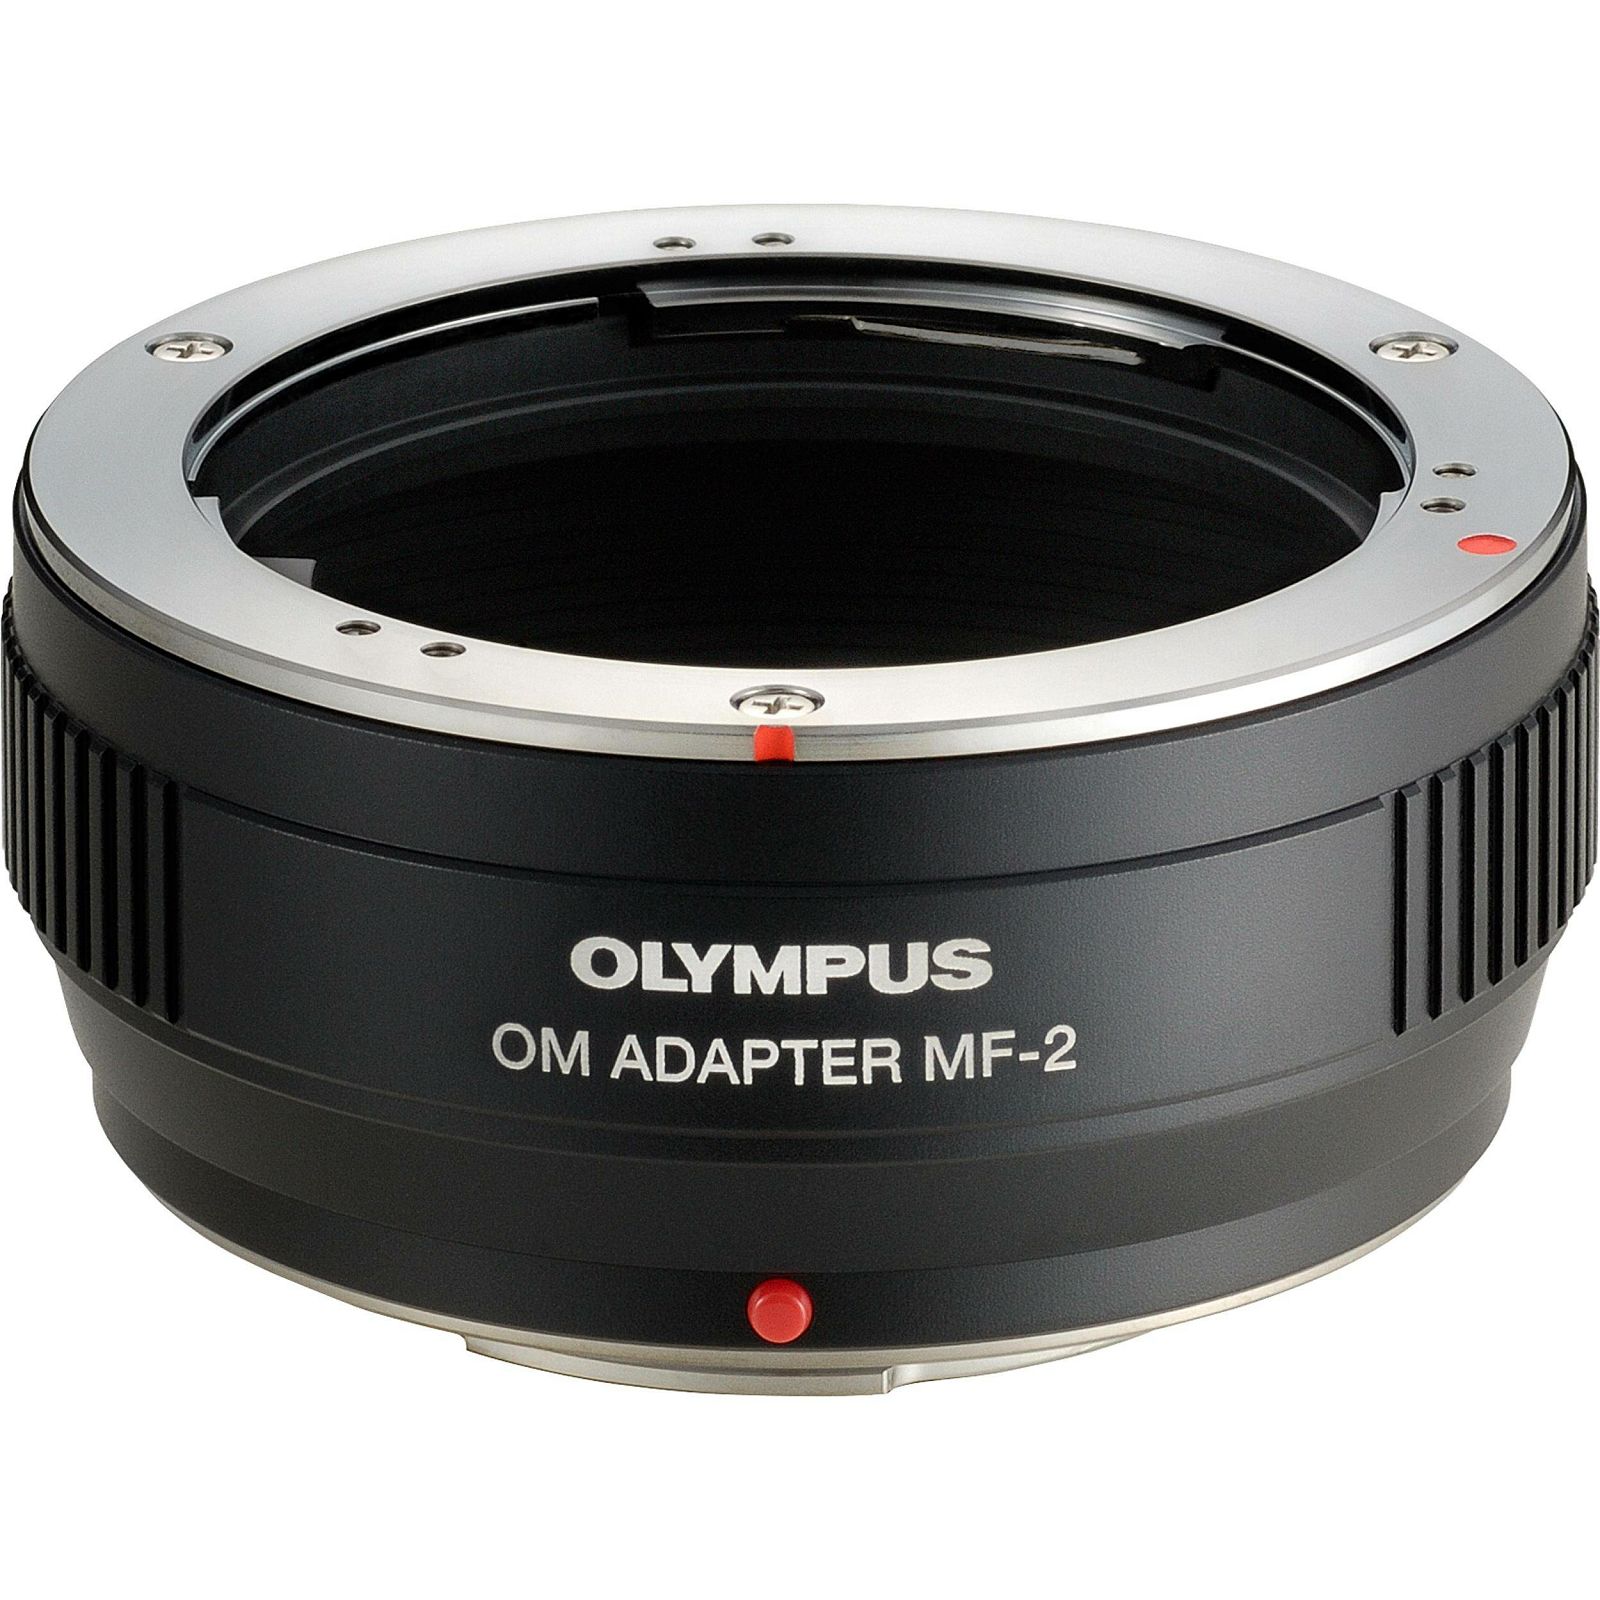 Olympus MF-2, OM-Adapter for Micro Four Thirds adapter za 4/3" DSLR N3594492